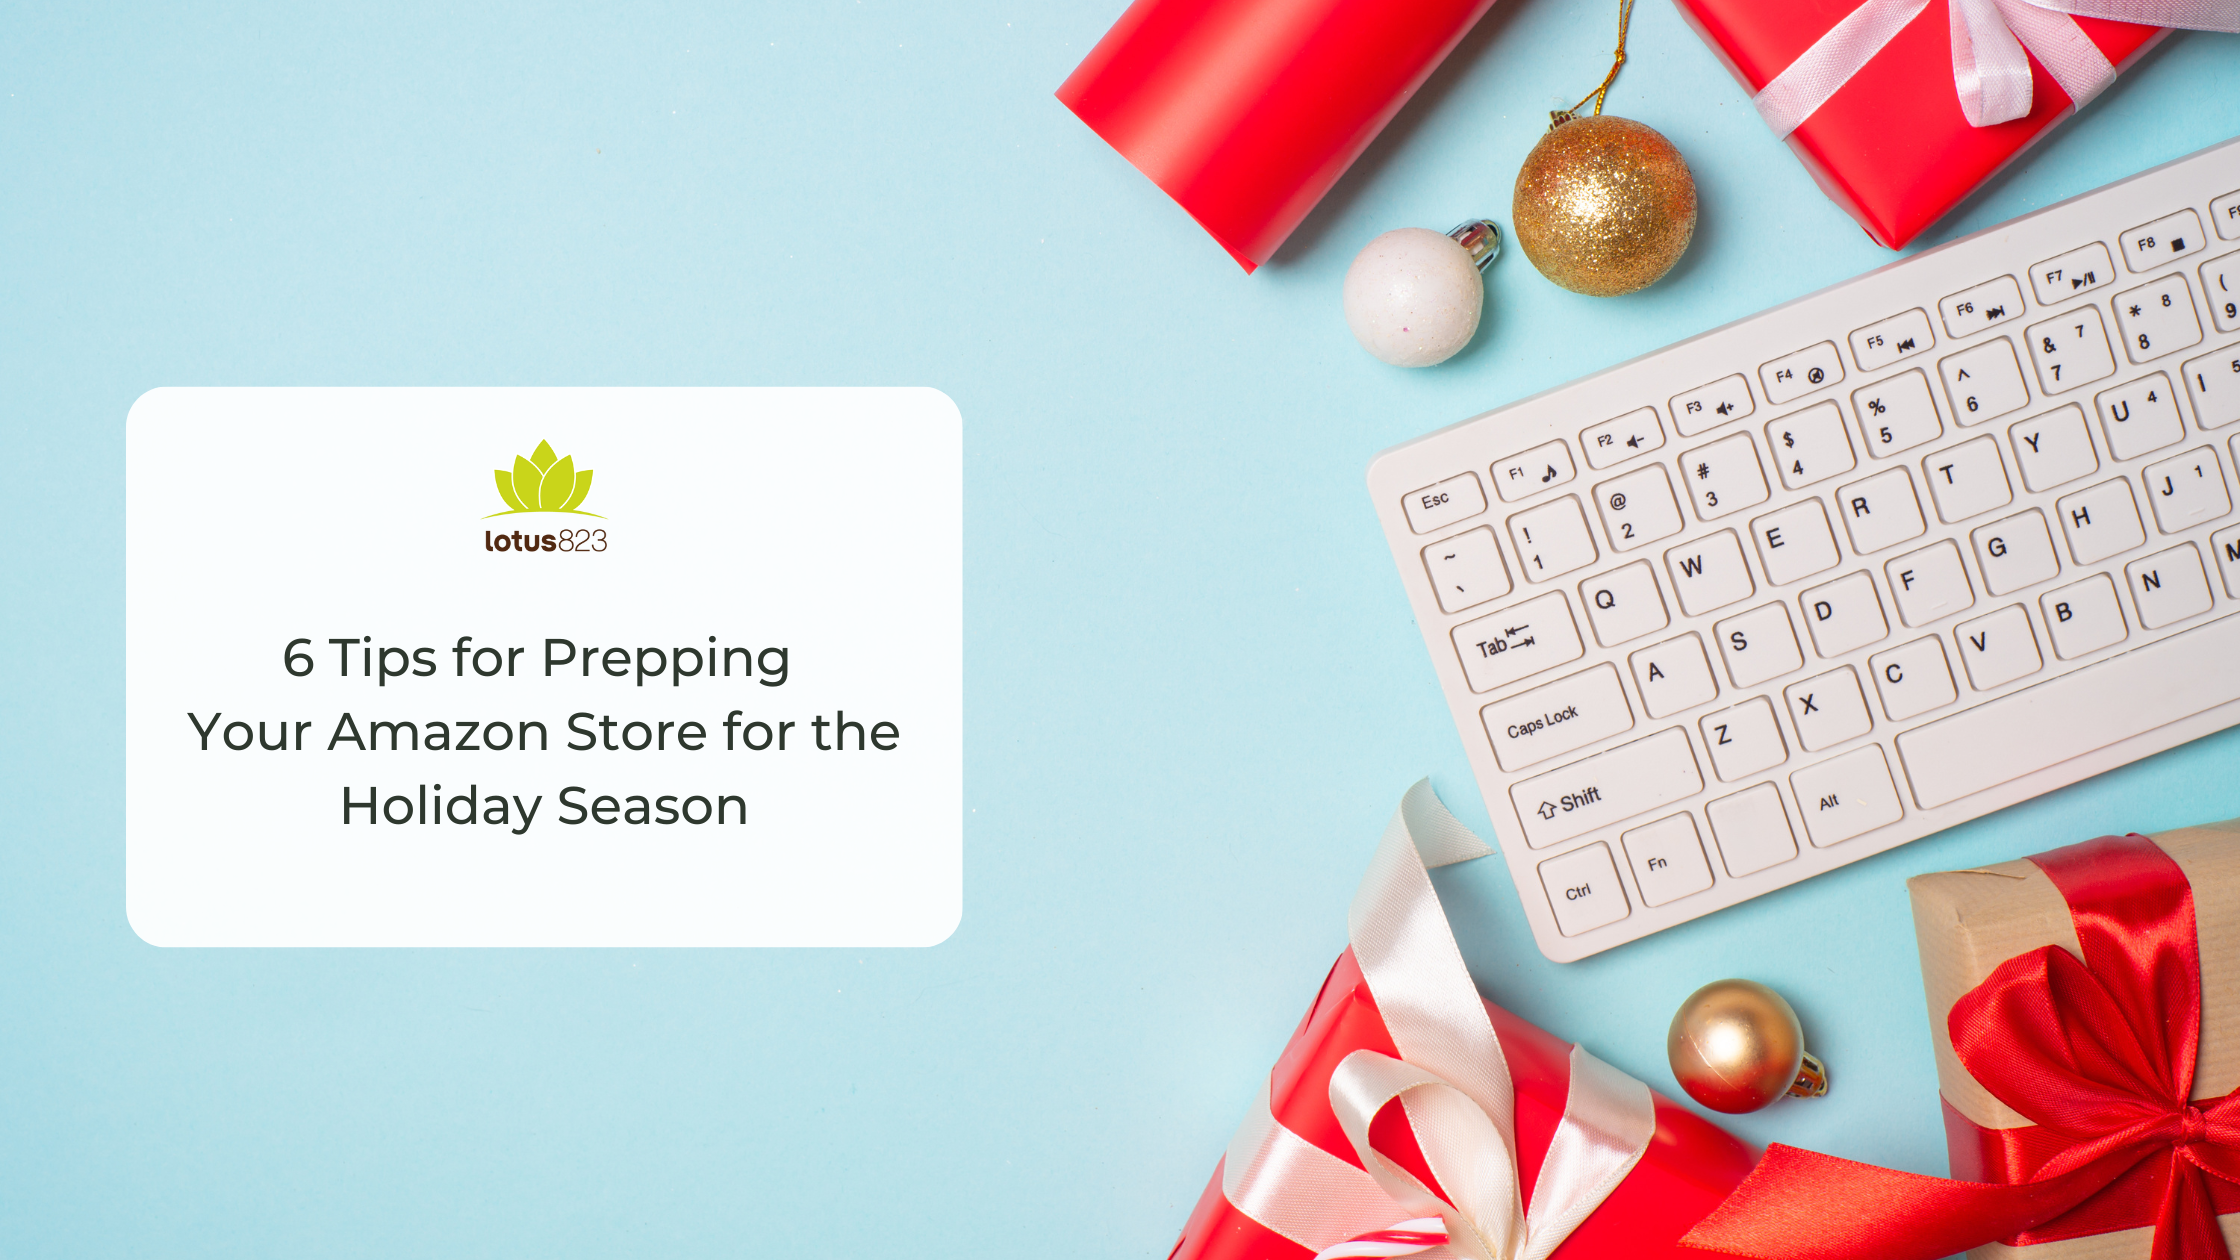 6 Tips for Prepping Your Amazon Store for the Holiday Season